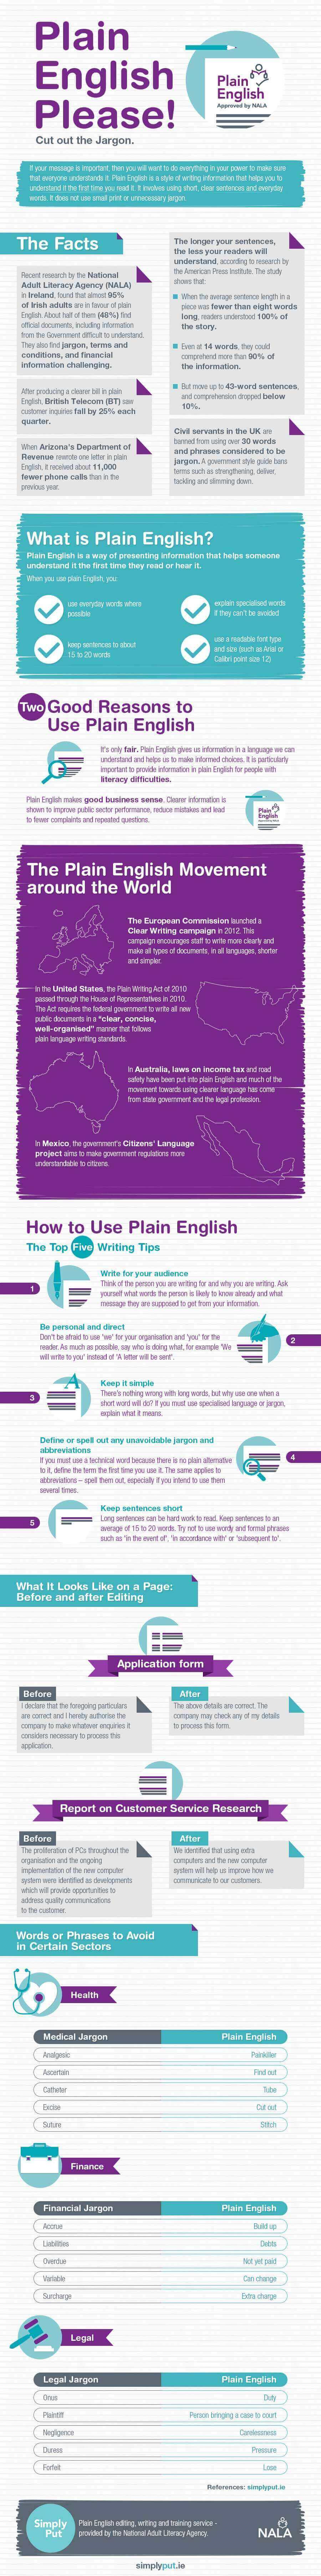 Plain English cuts out the jargon and enables people to understand information clearly. It is an important approach for those people dealing with members of the public – the Government, doctors, lawyers and many more professionals. In this infographic, find out about the plain English movement around the world as well as about the many benefits of using plain English.